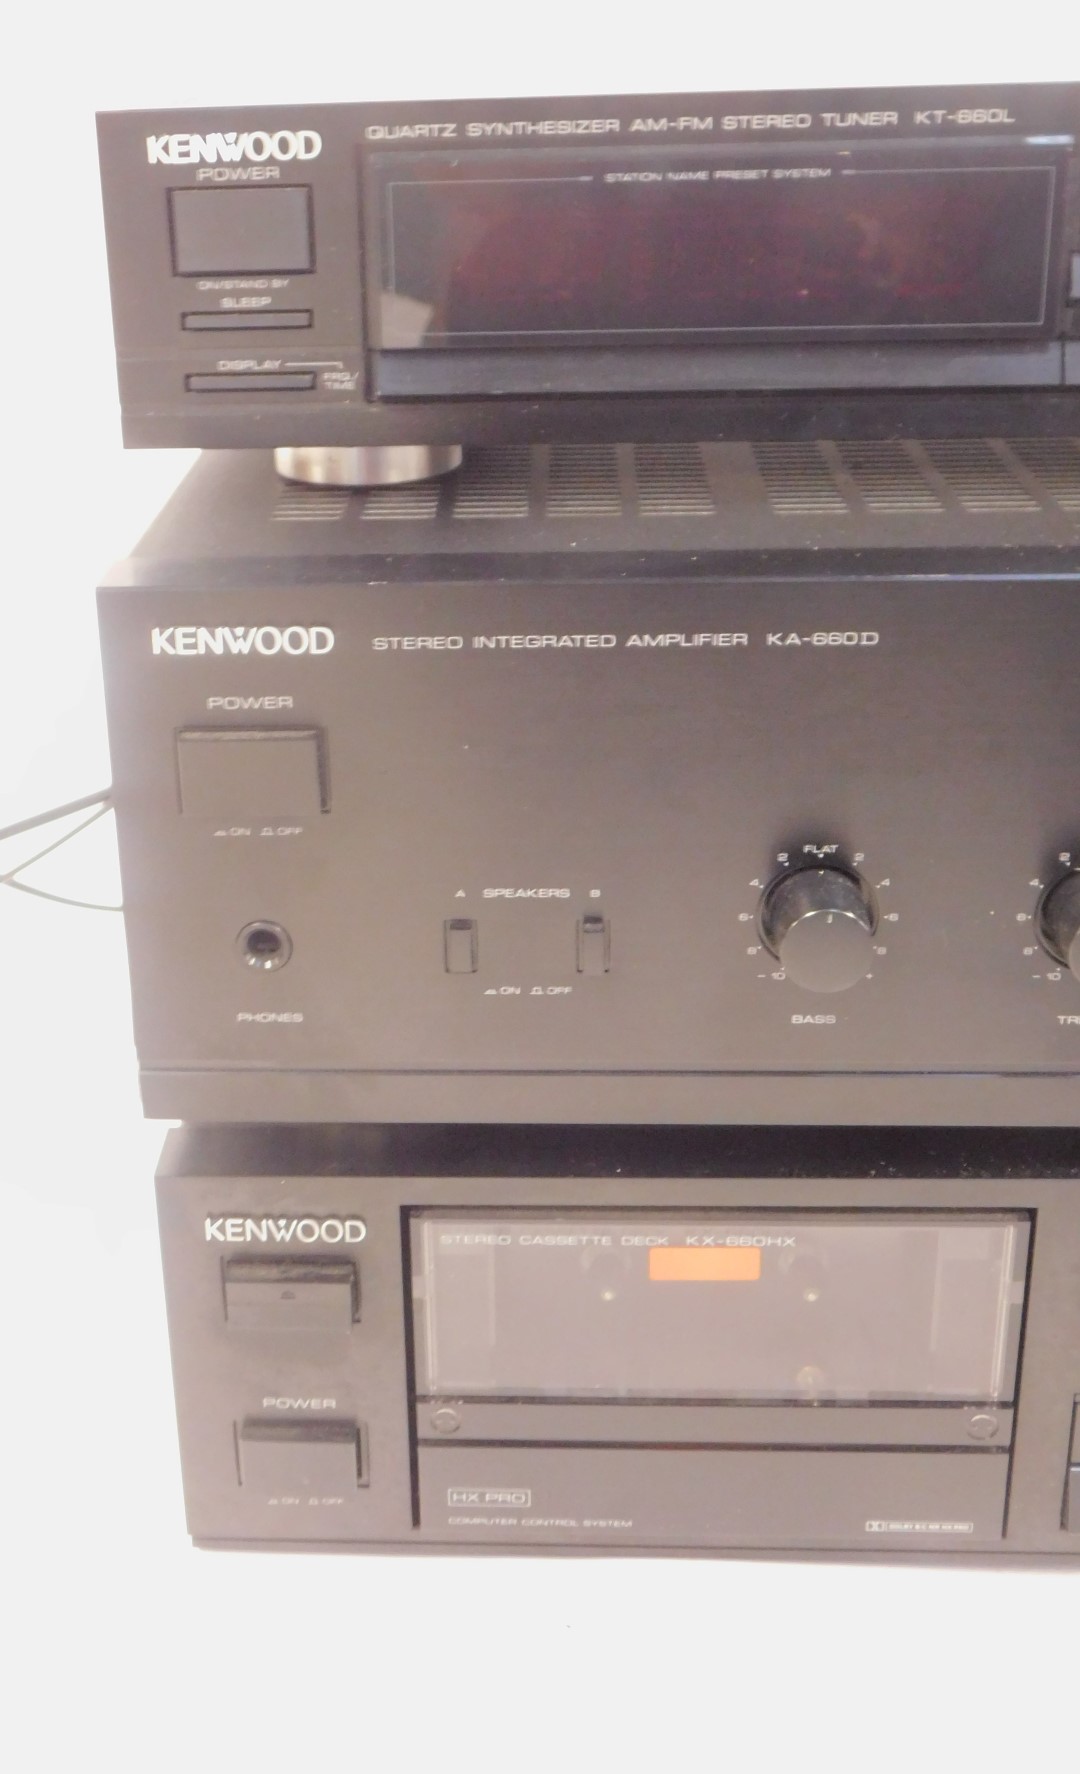 HI-Fi equipment, comprising a Kenwood Quartz synthesizer AM-FM Stereo tuner KT-660L, a Kenwood Stere - Image 2 of 3